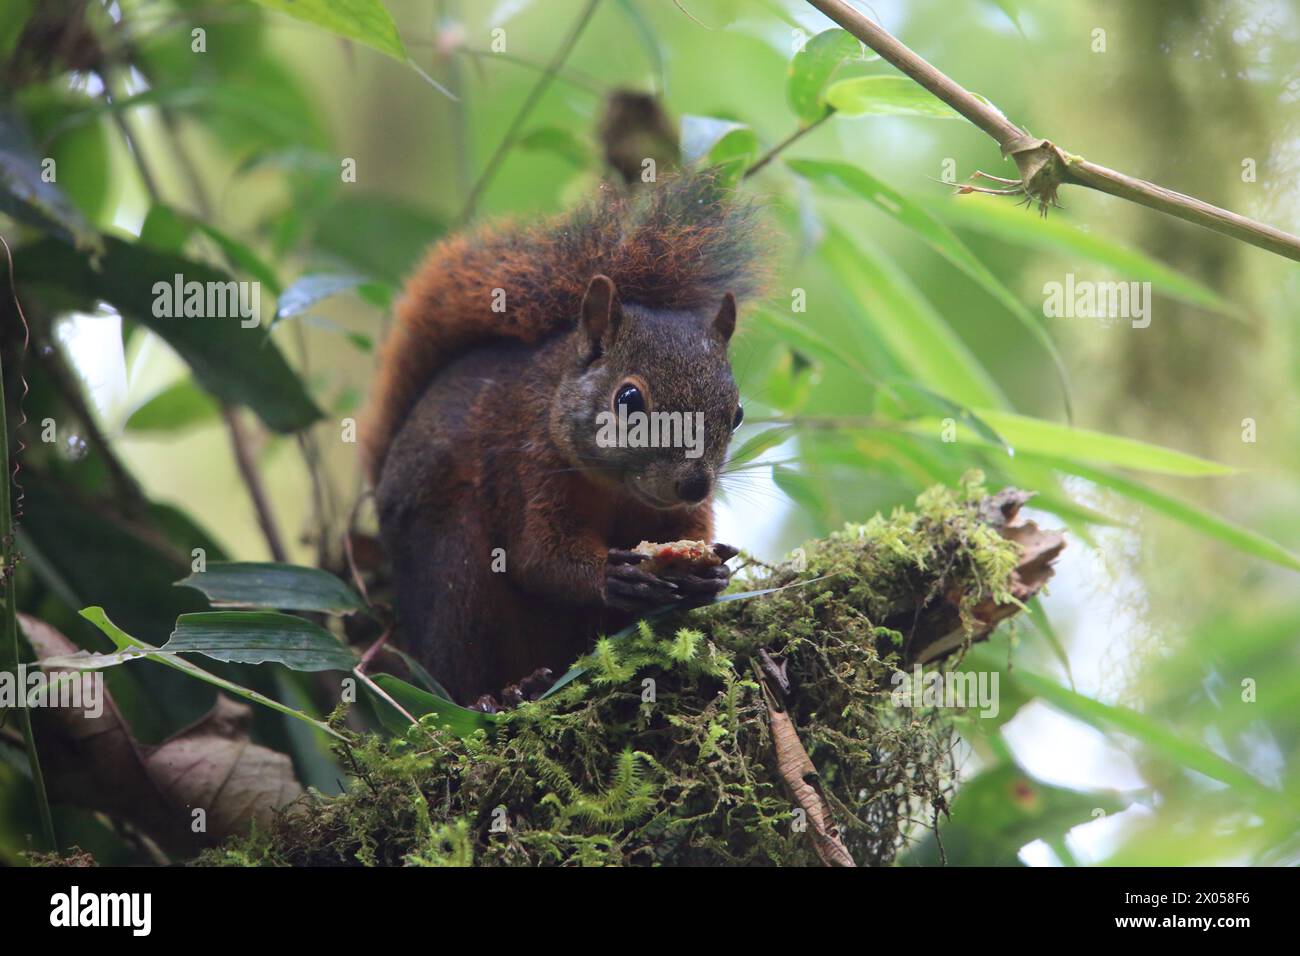 The red-tailed squirrel (Sciurus granatensis) is a species of tree squirrel distributed from southern Central America to northern South America. This Stock Photo